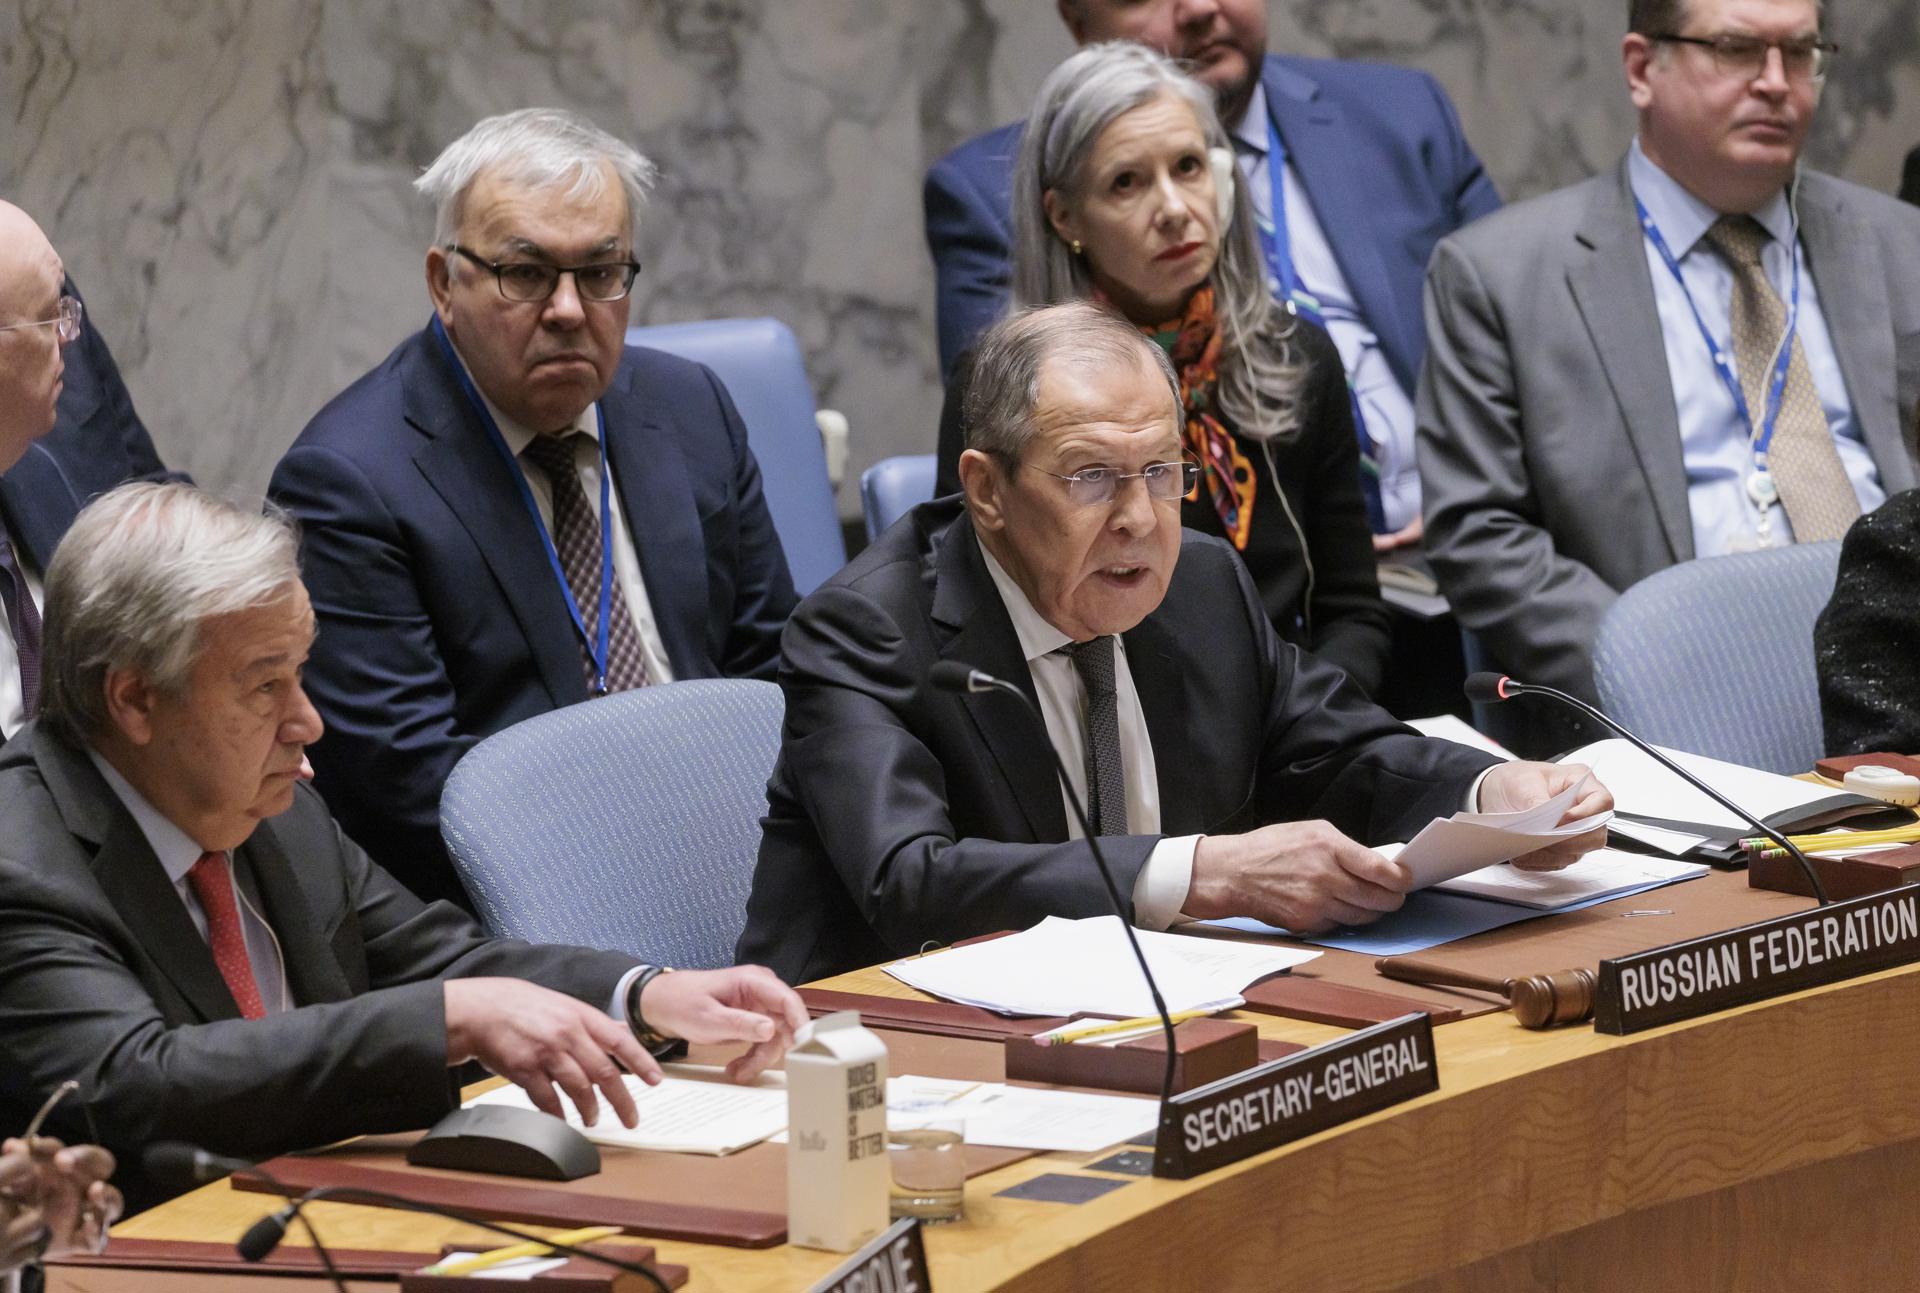 Russian Foreign Minister Sergei Lavrov (c) speaks, as United Nations Secretary General Antonio Guterres (l) listens, at a UN Security Council session held at Russia's request on April 24, 2023, at UN headquarters in New York. EFE/Justin Lane
